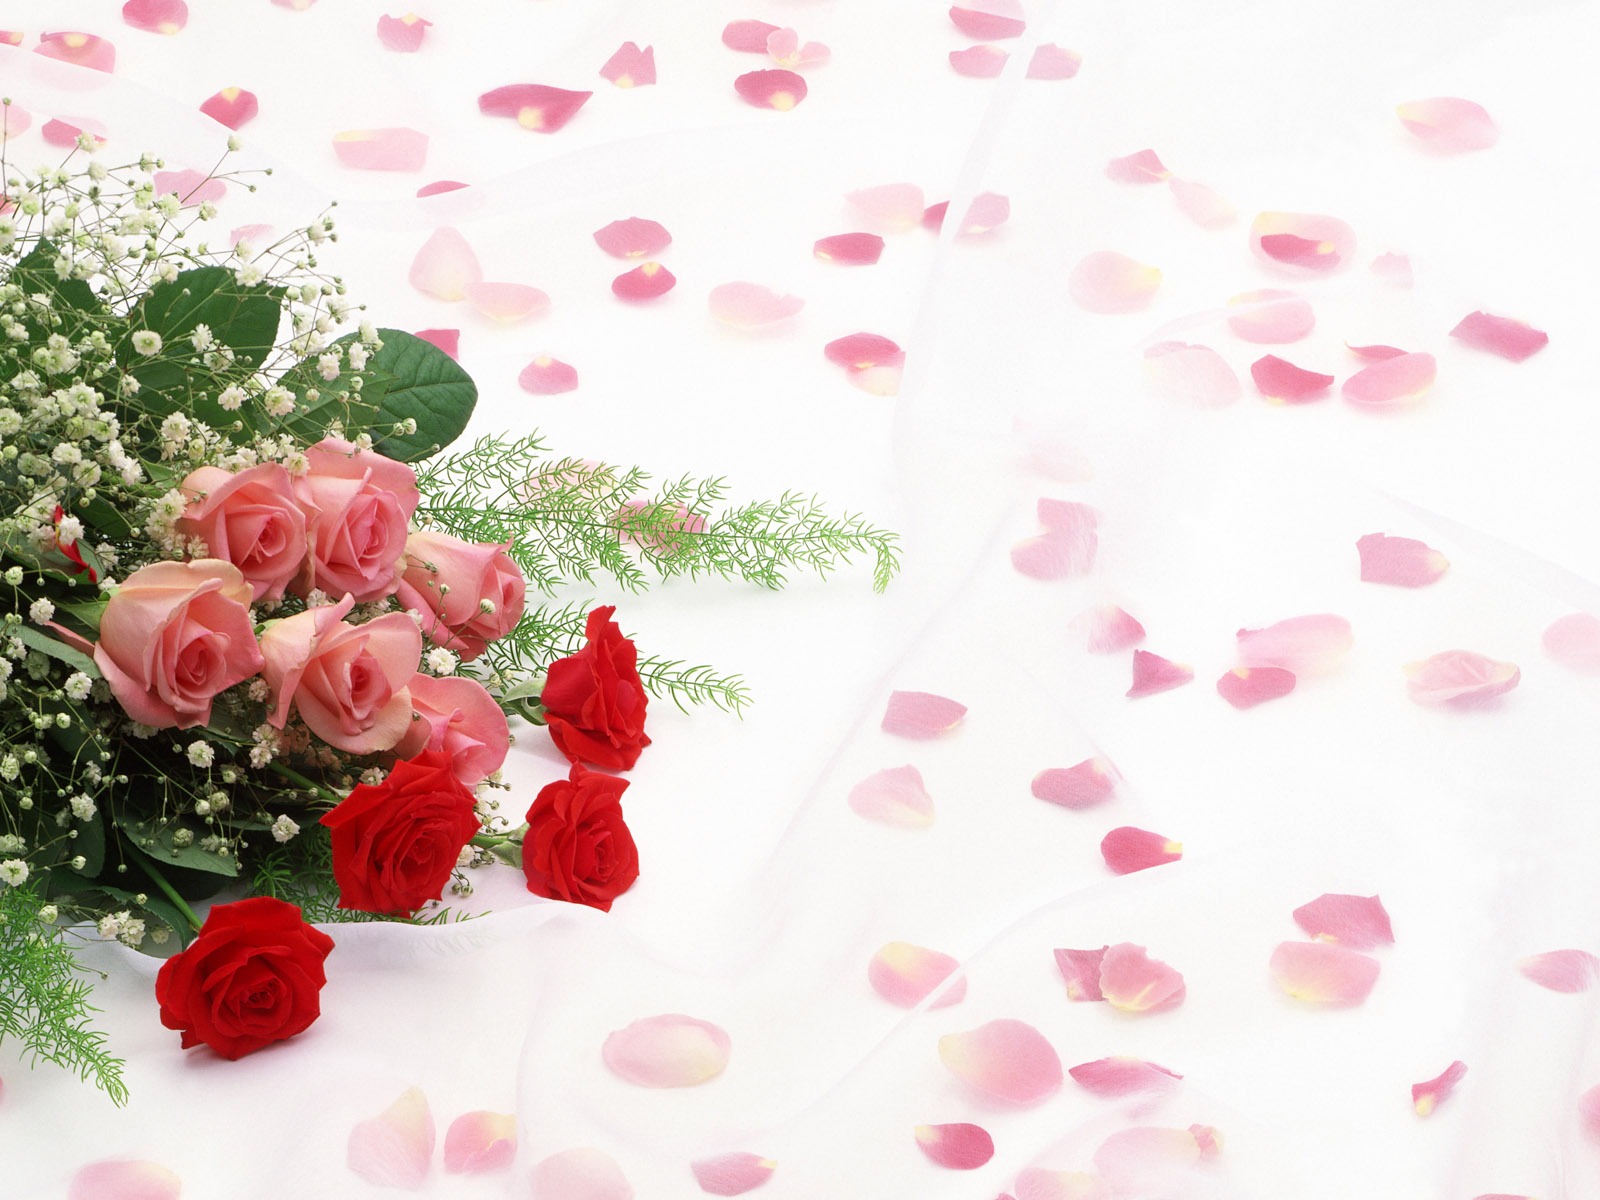 Wedding Flowers items wallpapers (1) #6 - 1600x1200